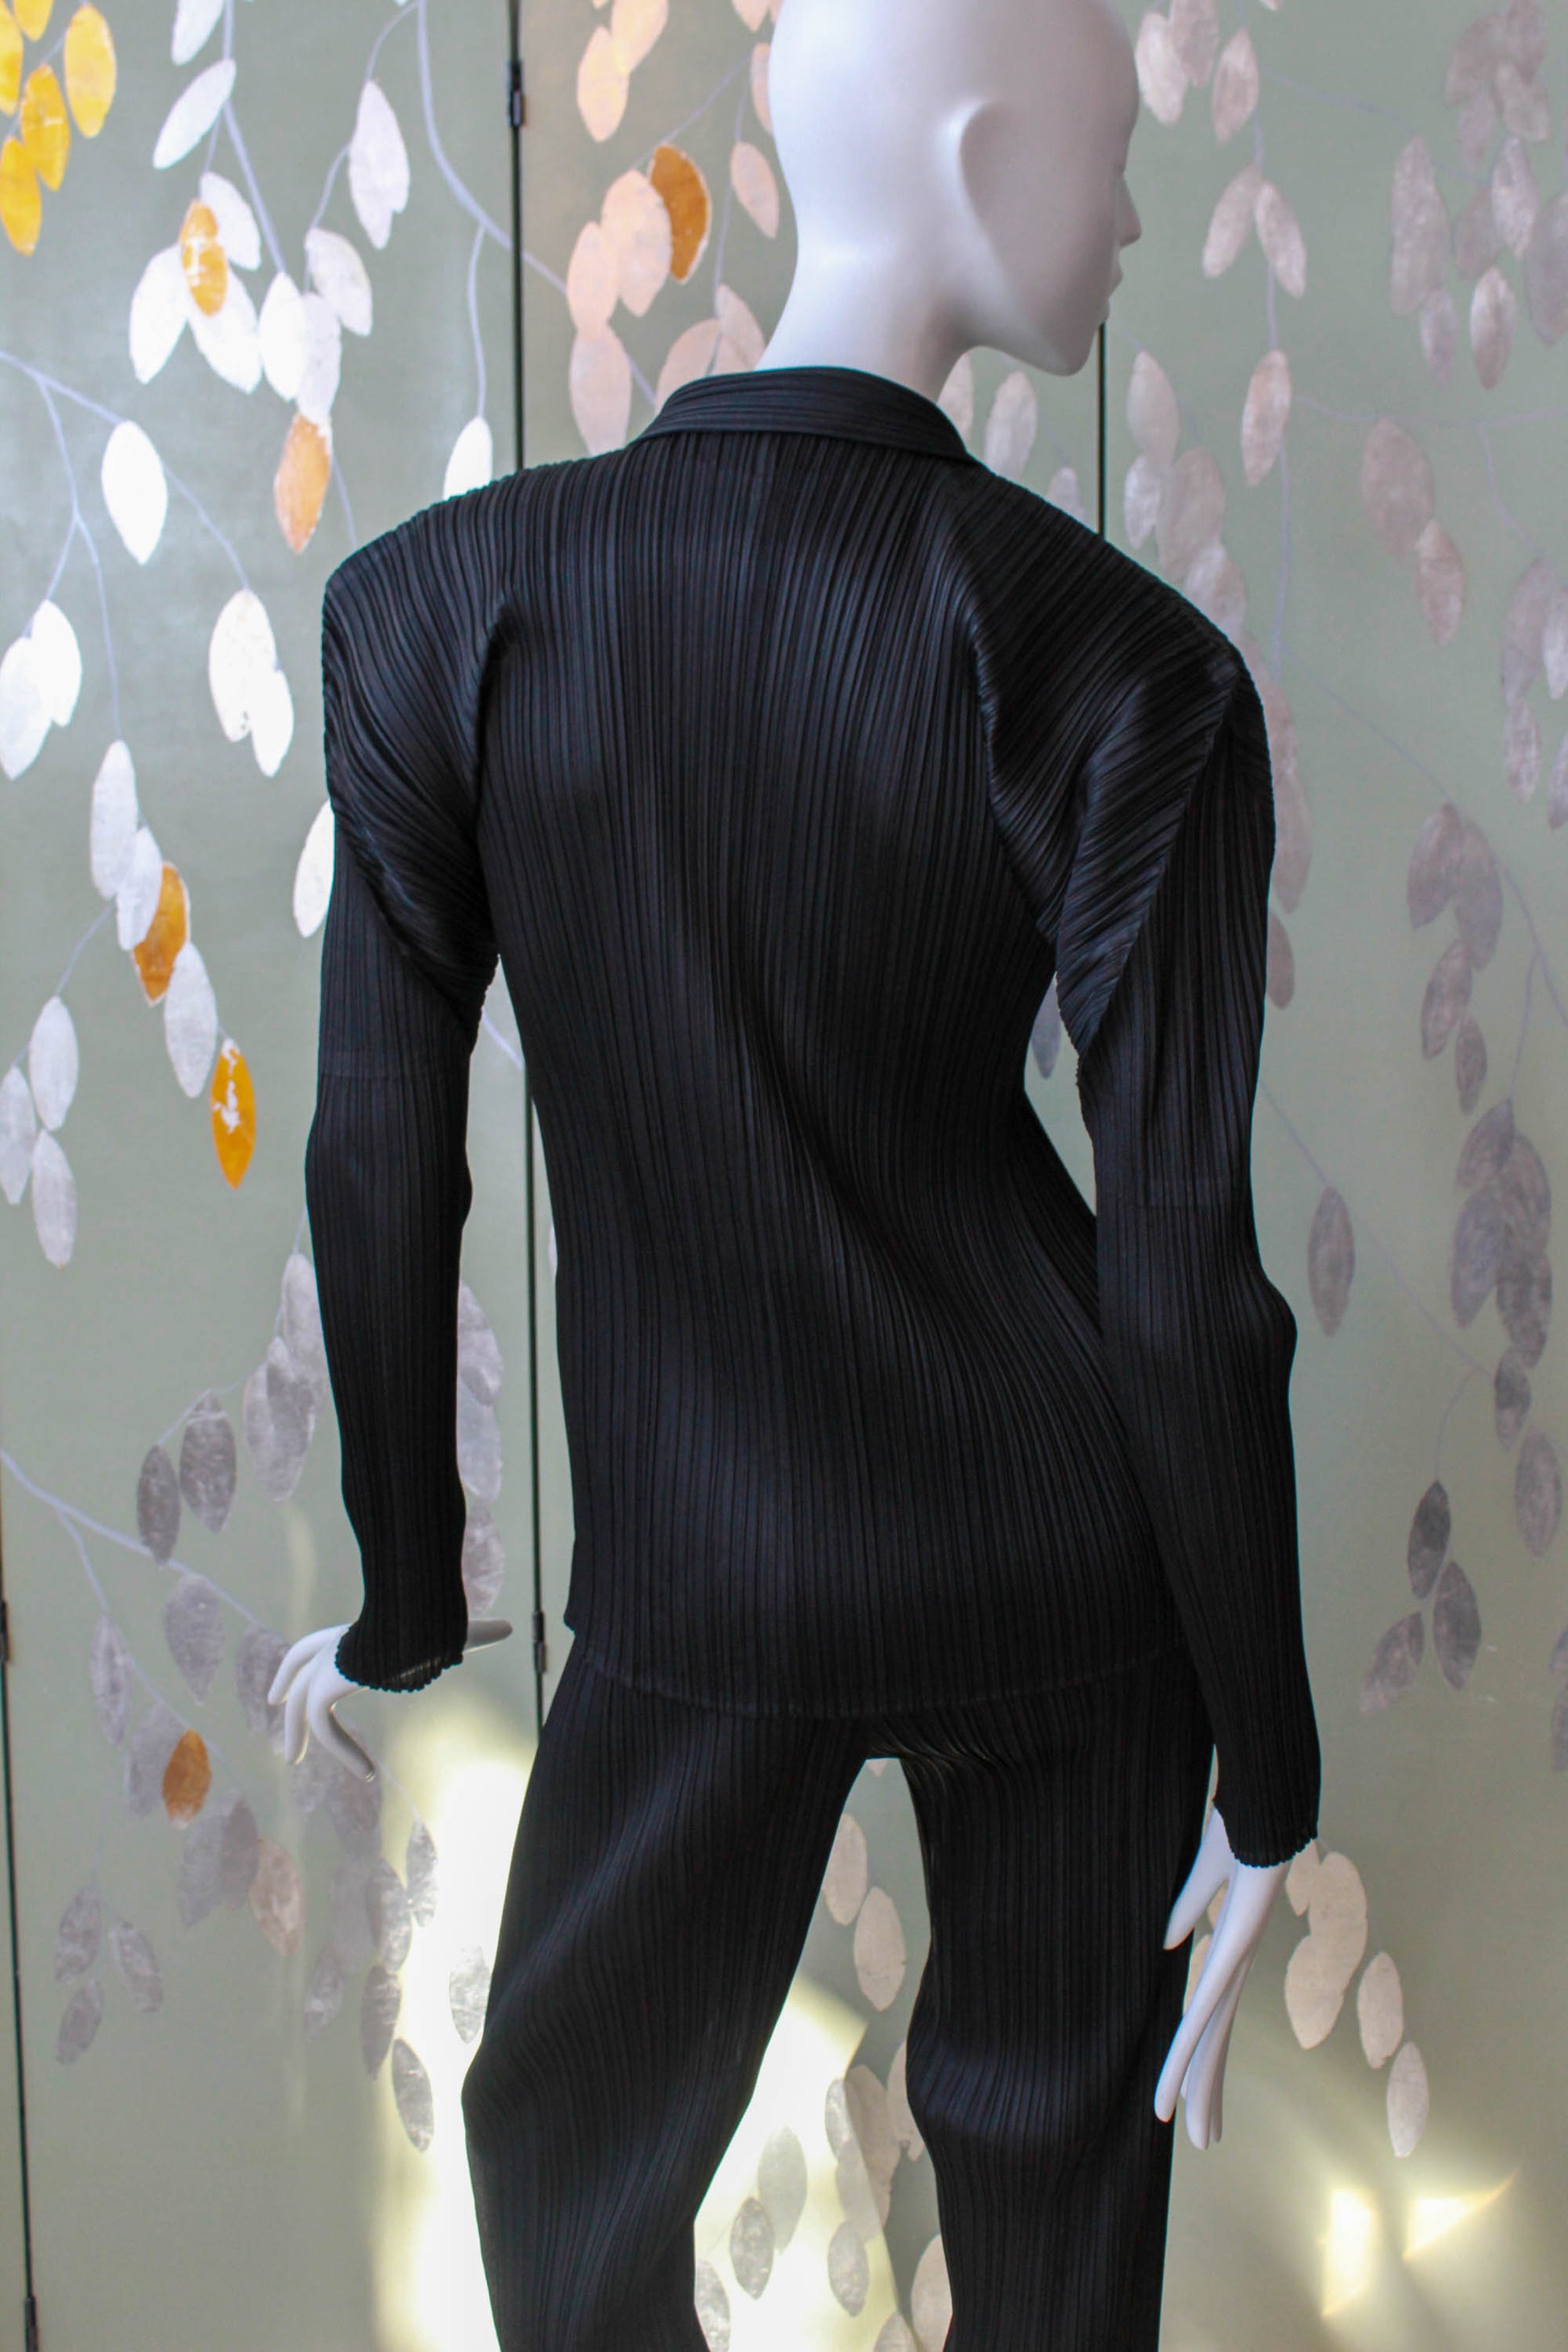 y2k early 2000s issey miyake pleats please button up shirt black with angled and pointed, structurally seamed shoulders, vintage designer clothing